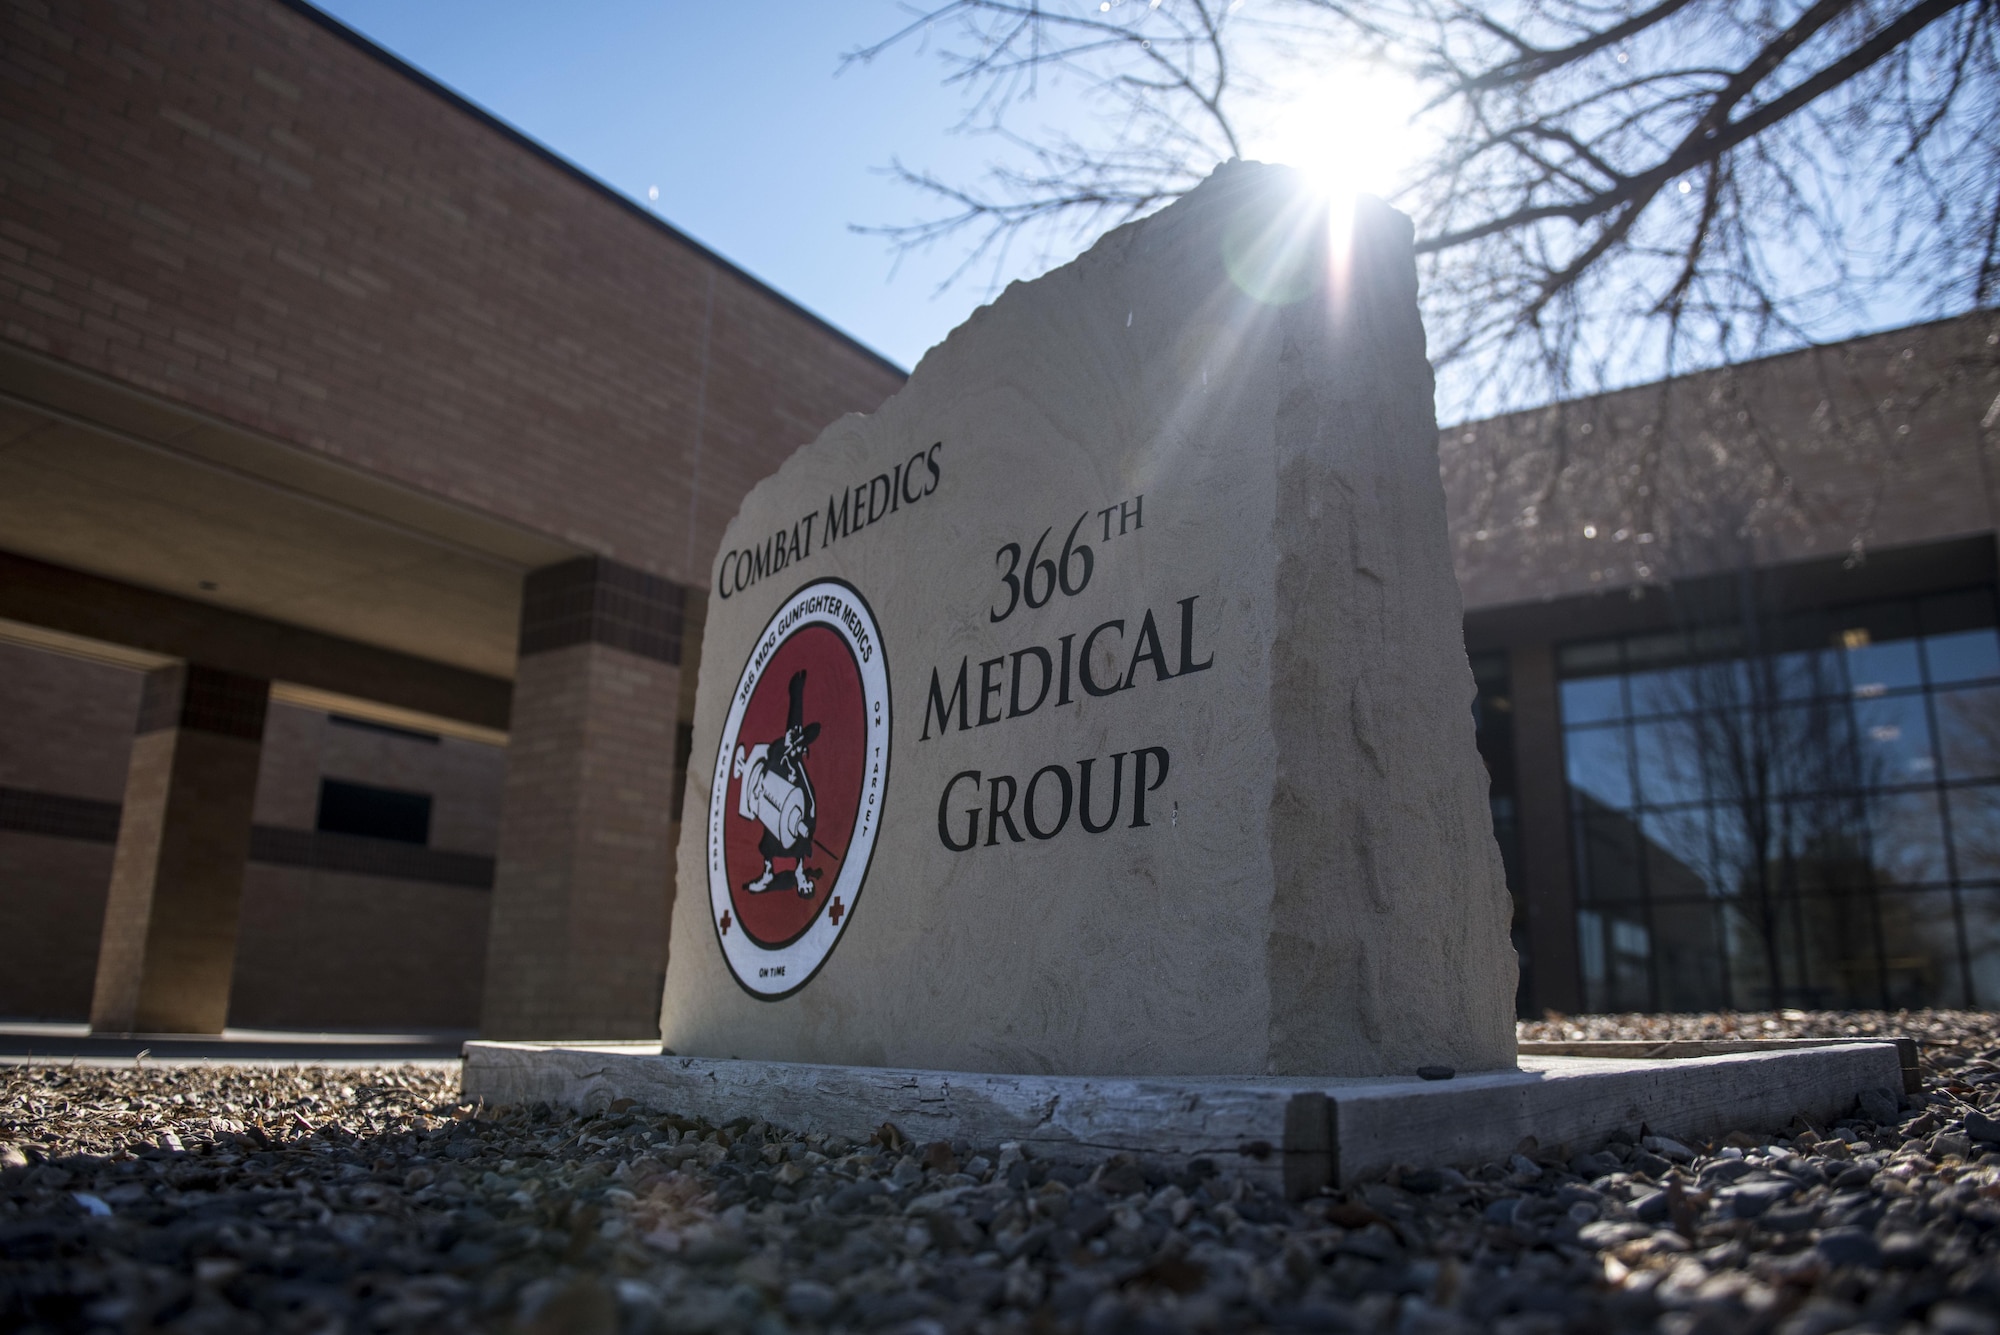 The 366th Medical Group at Mountain Home Air Force Base, Idaho, will begin transitioning to an outpatient clinic mid-summer, 2017. St. Luke's of Elmore County will accommodate service members and their families in support of the MDG transition. (U.S. Air Force photo by Airman 1st Class Jeremy L. Mosier/RELEASED)